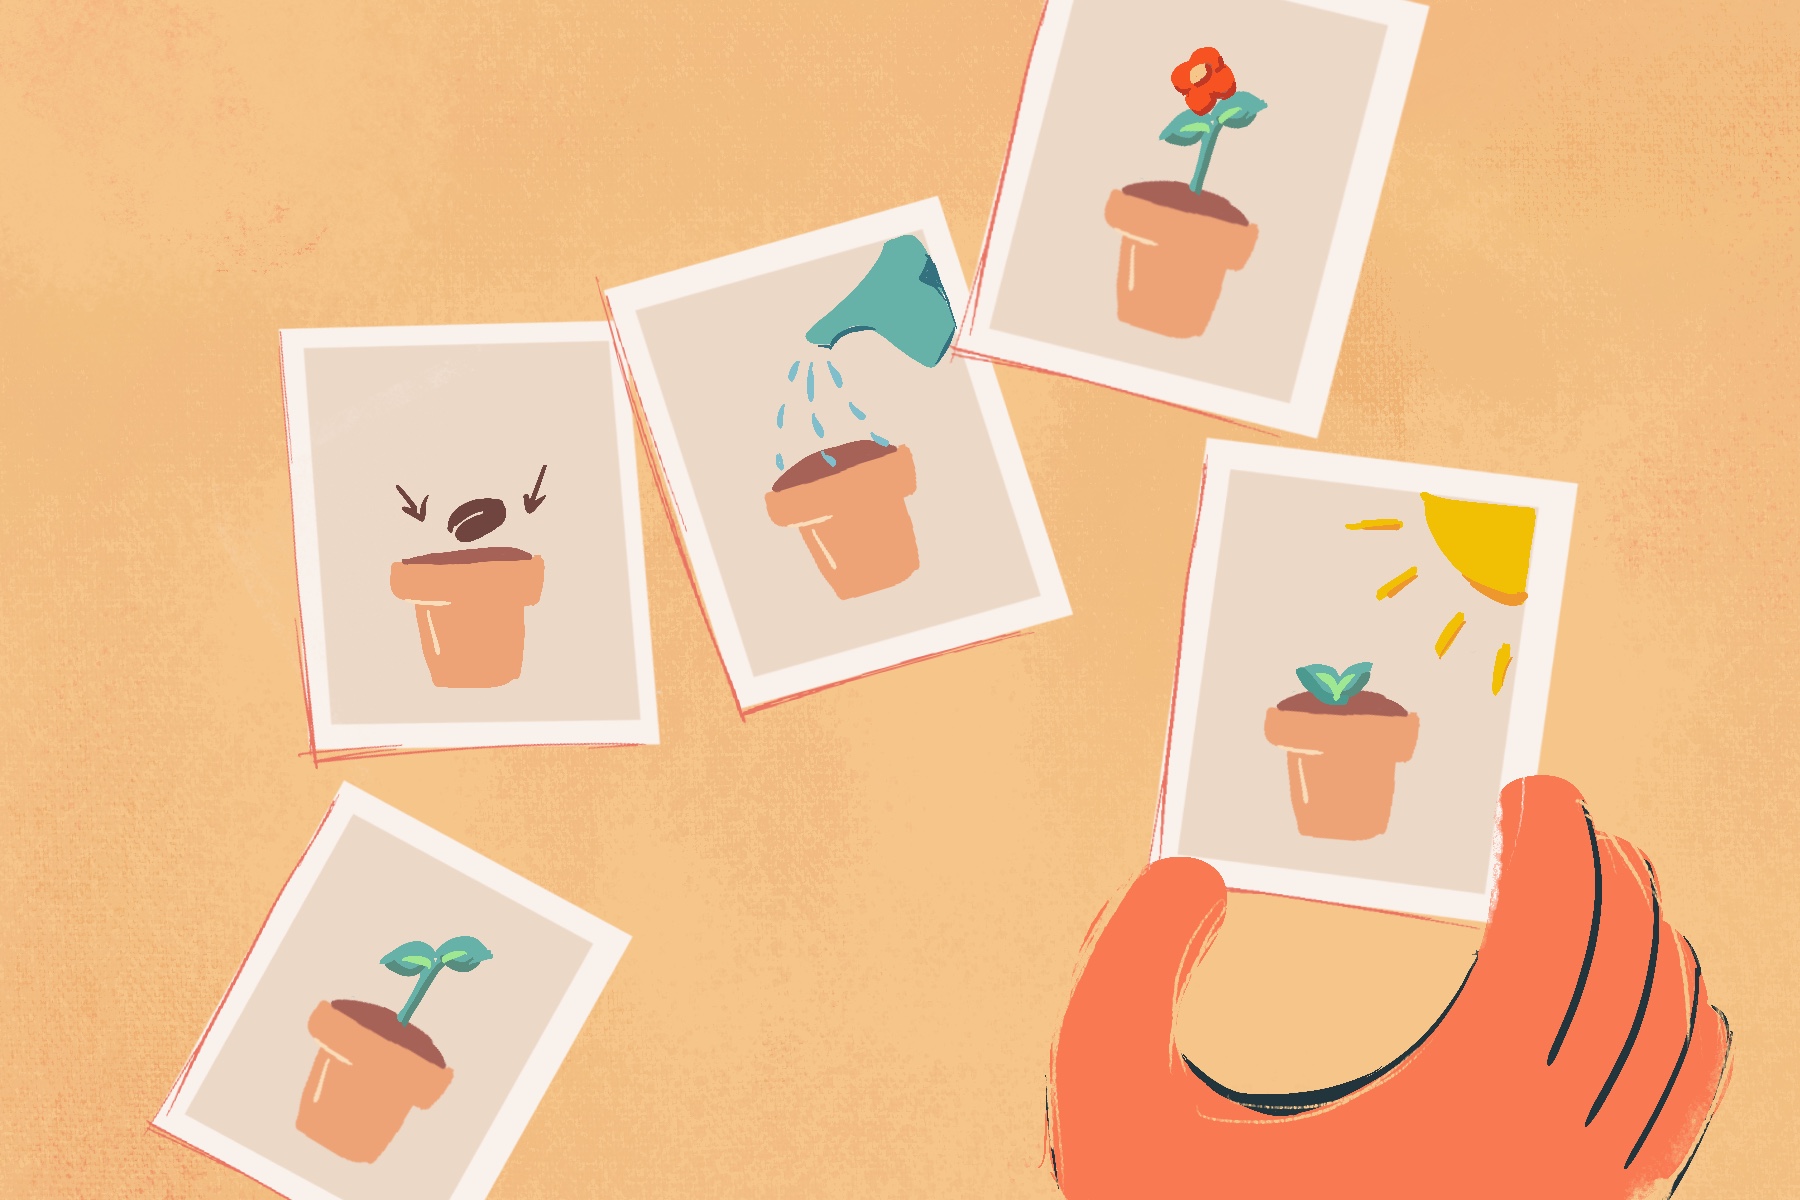 Illustration of five picture of potted plant at different growing stages and hand holding picture of grown plant with sun